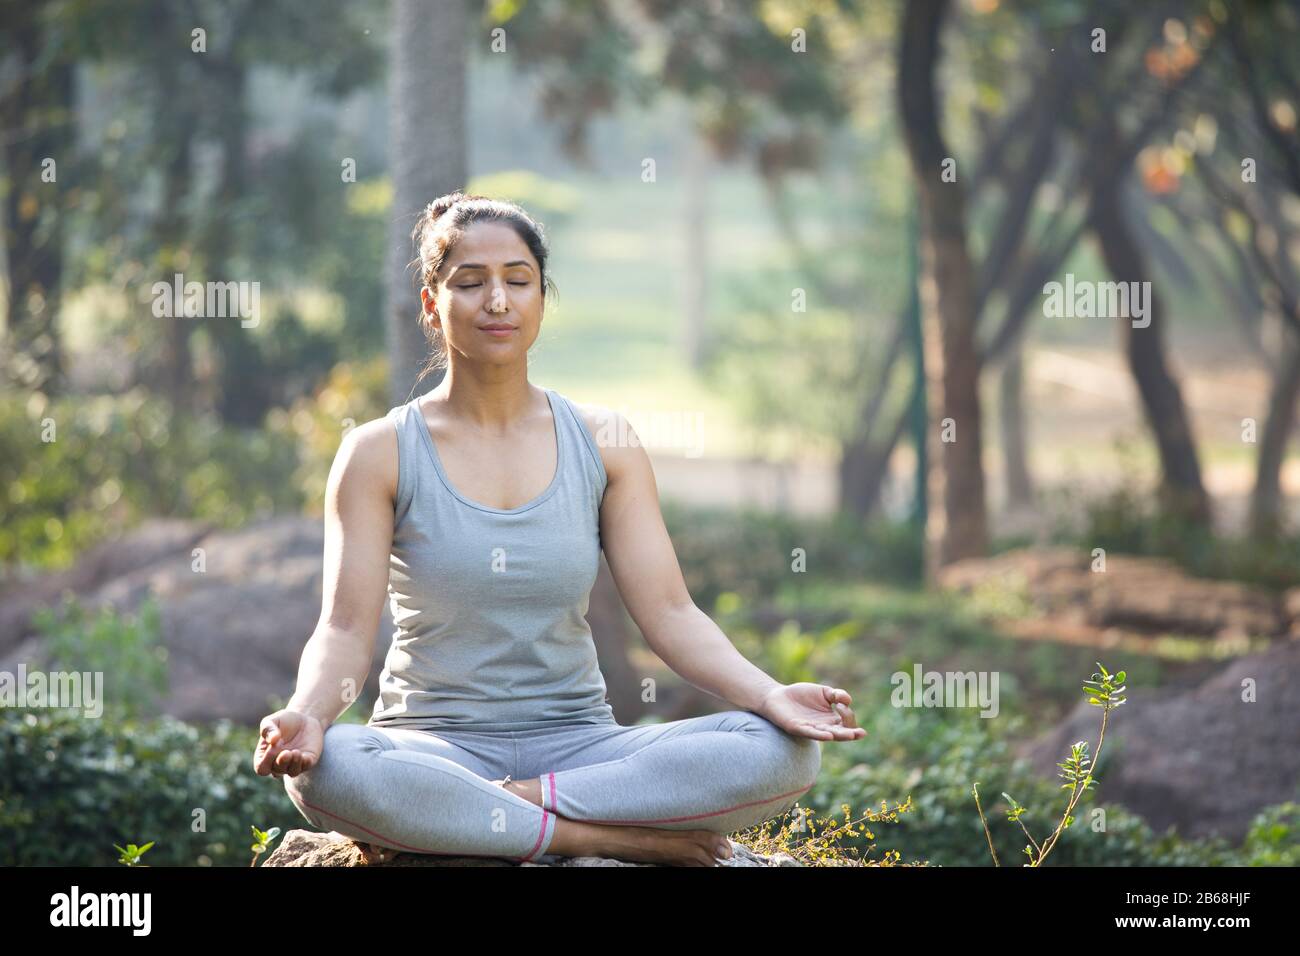 Woman practicing yoga in lotus position at park Stock Photo